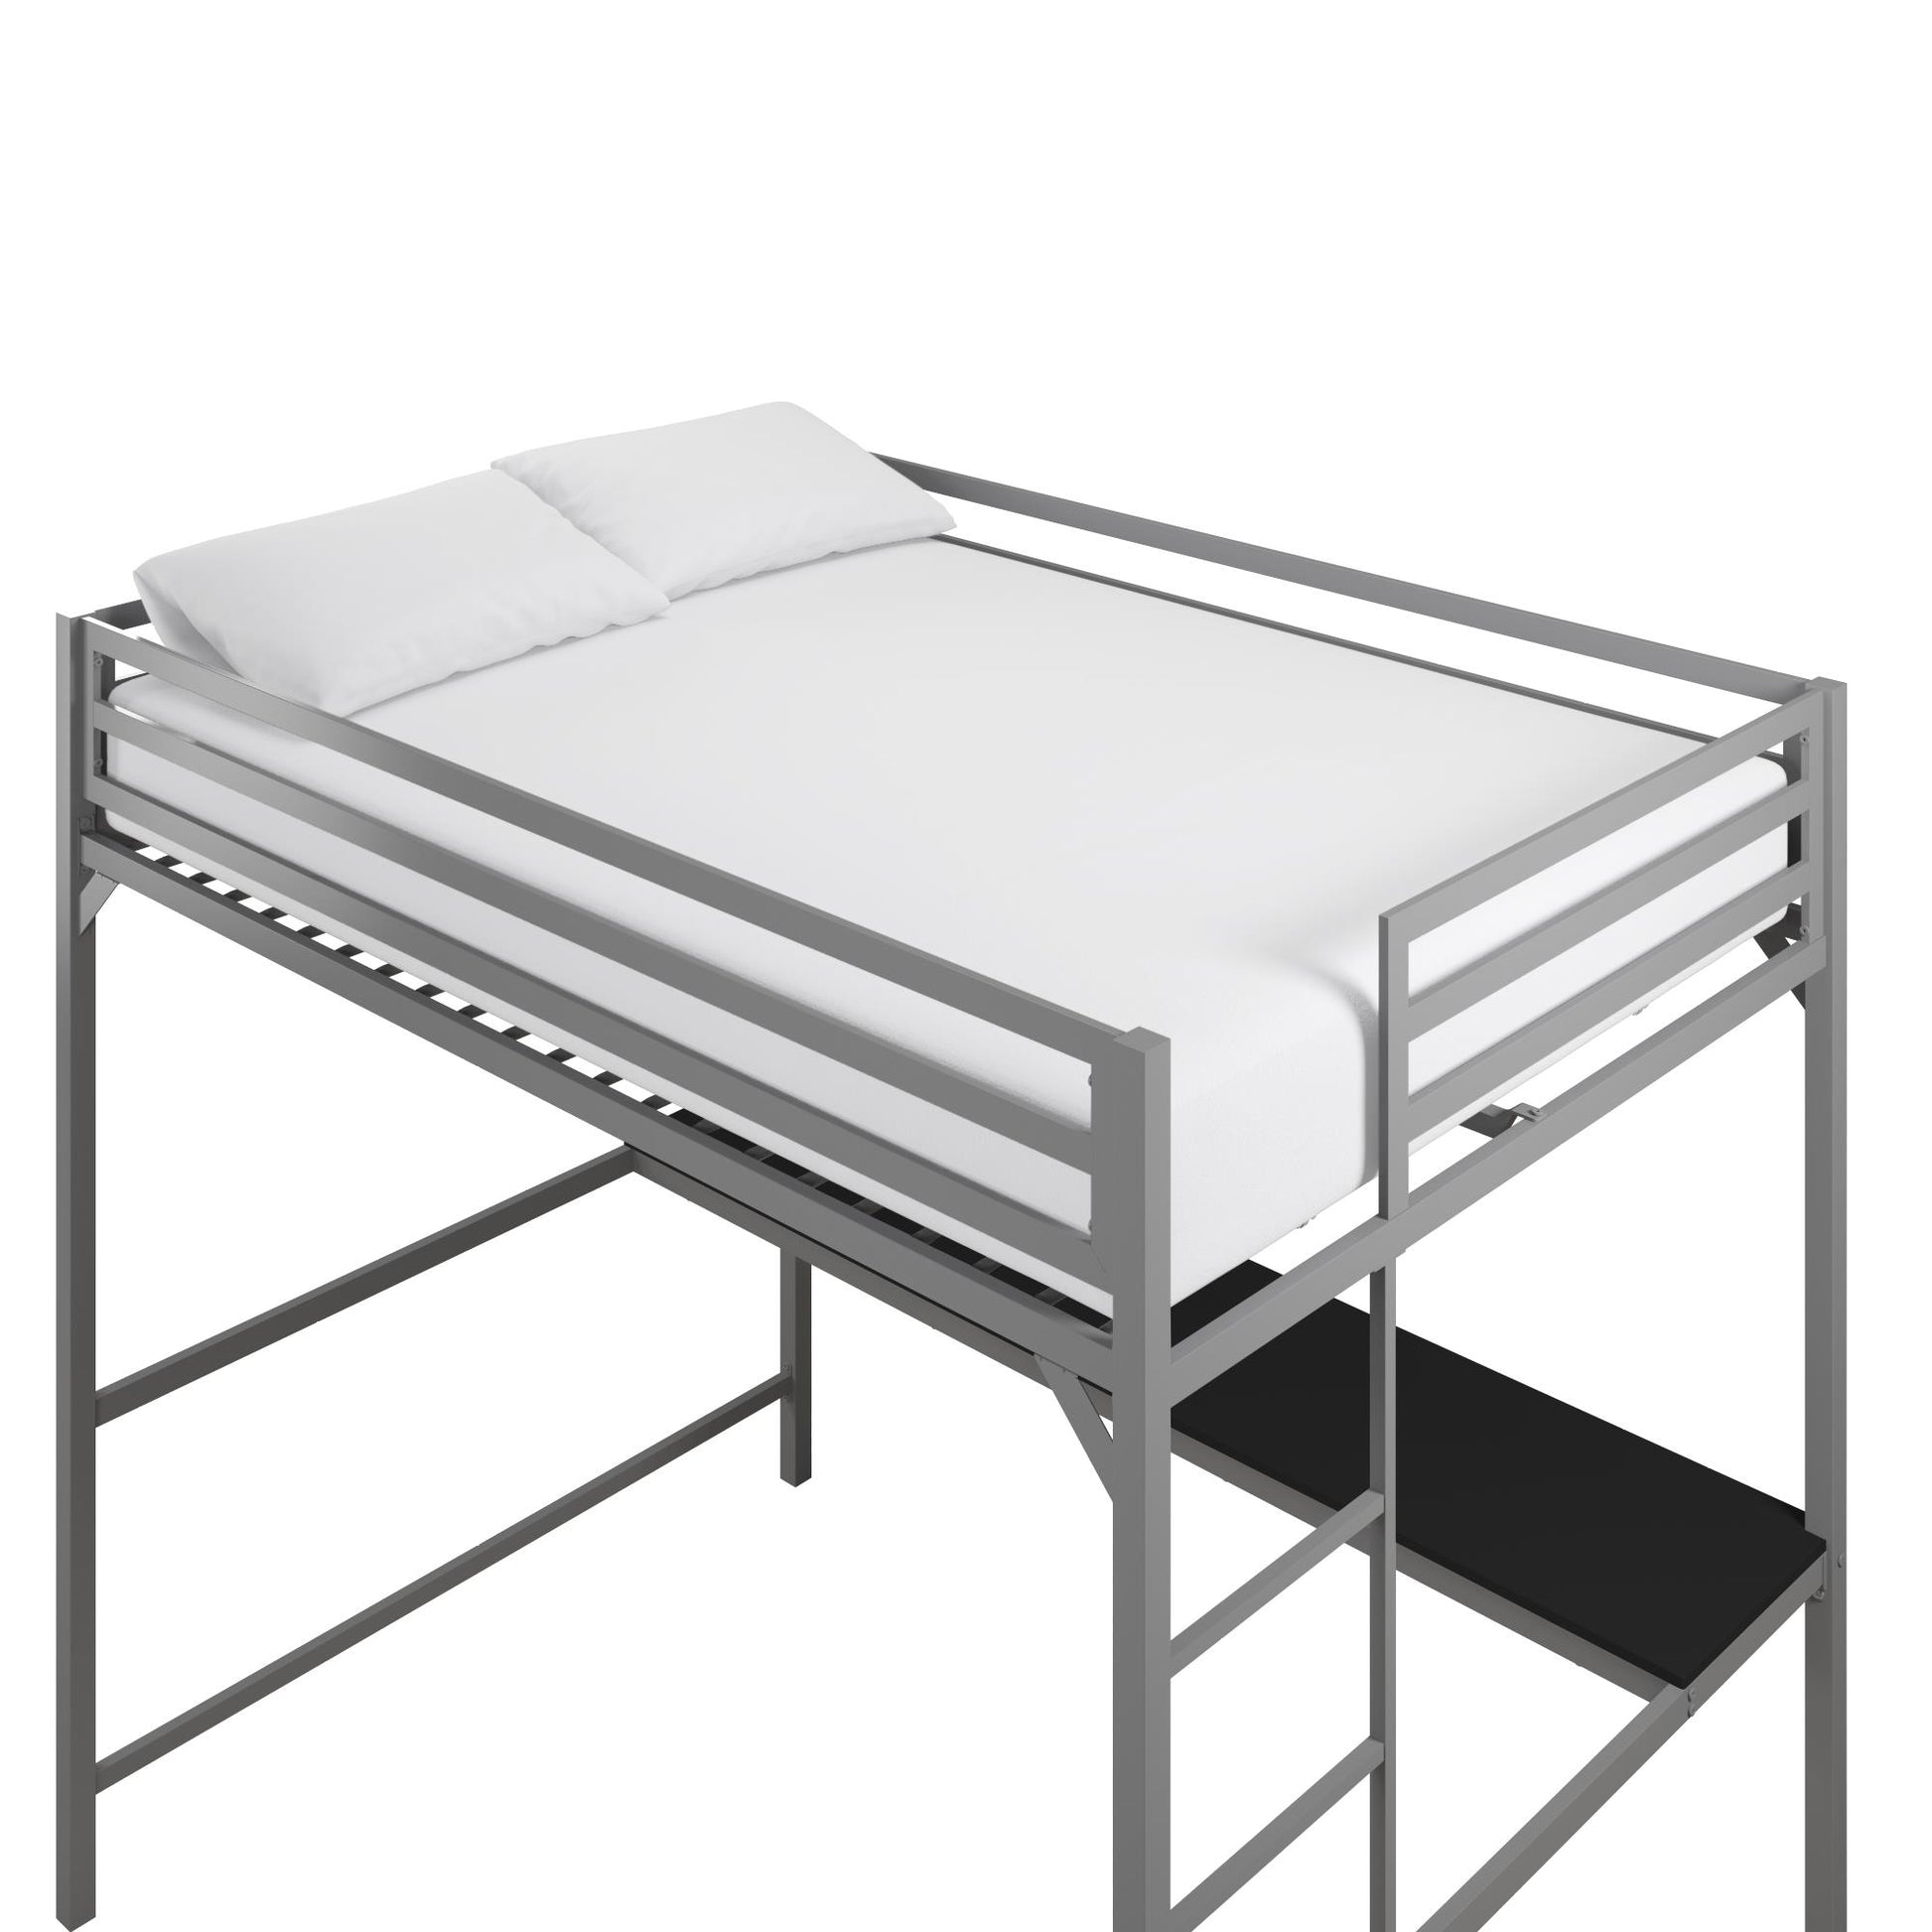 Miles Metal Full Loft Bed with Desk with an Integrated Ladder - Silver - Full